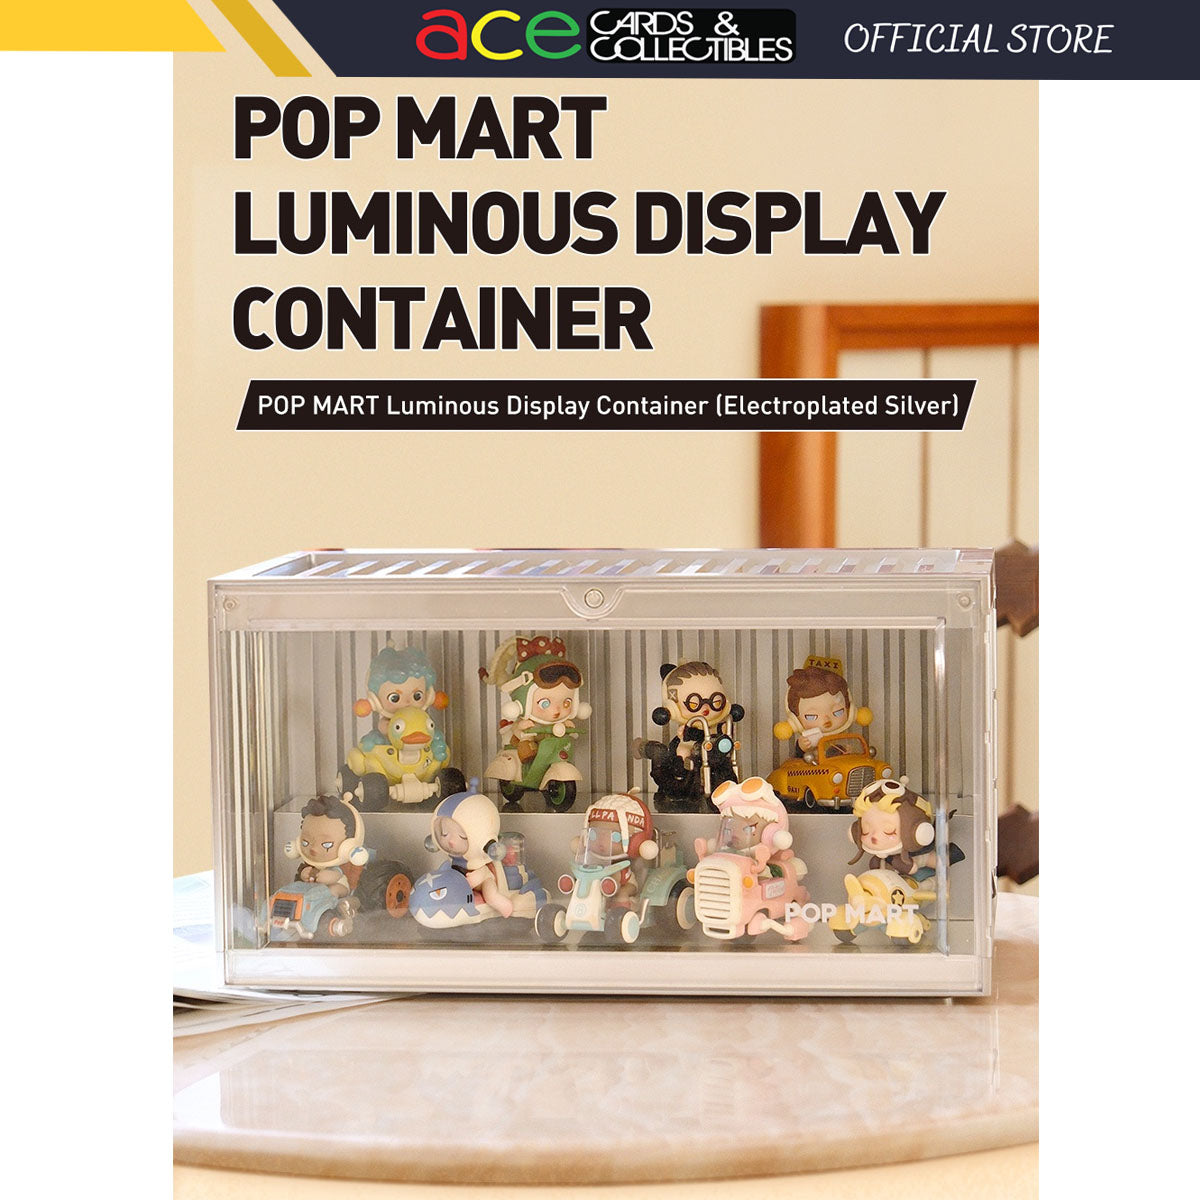 POP MART Luminous Display Container (Electroplated Silver)-Pop Mart-Ace Cards &amp; Collectibles